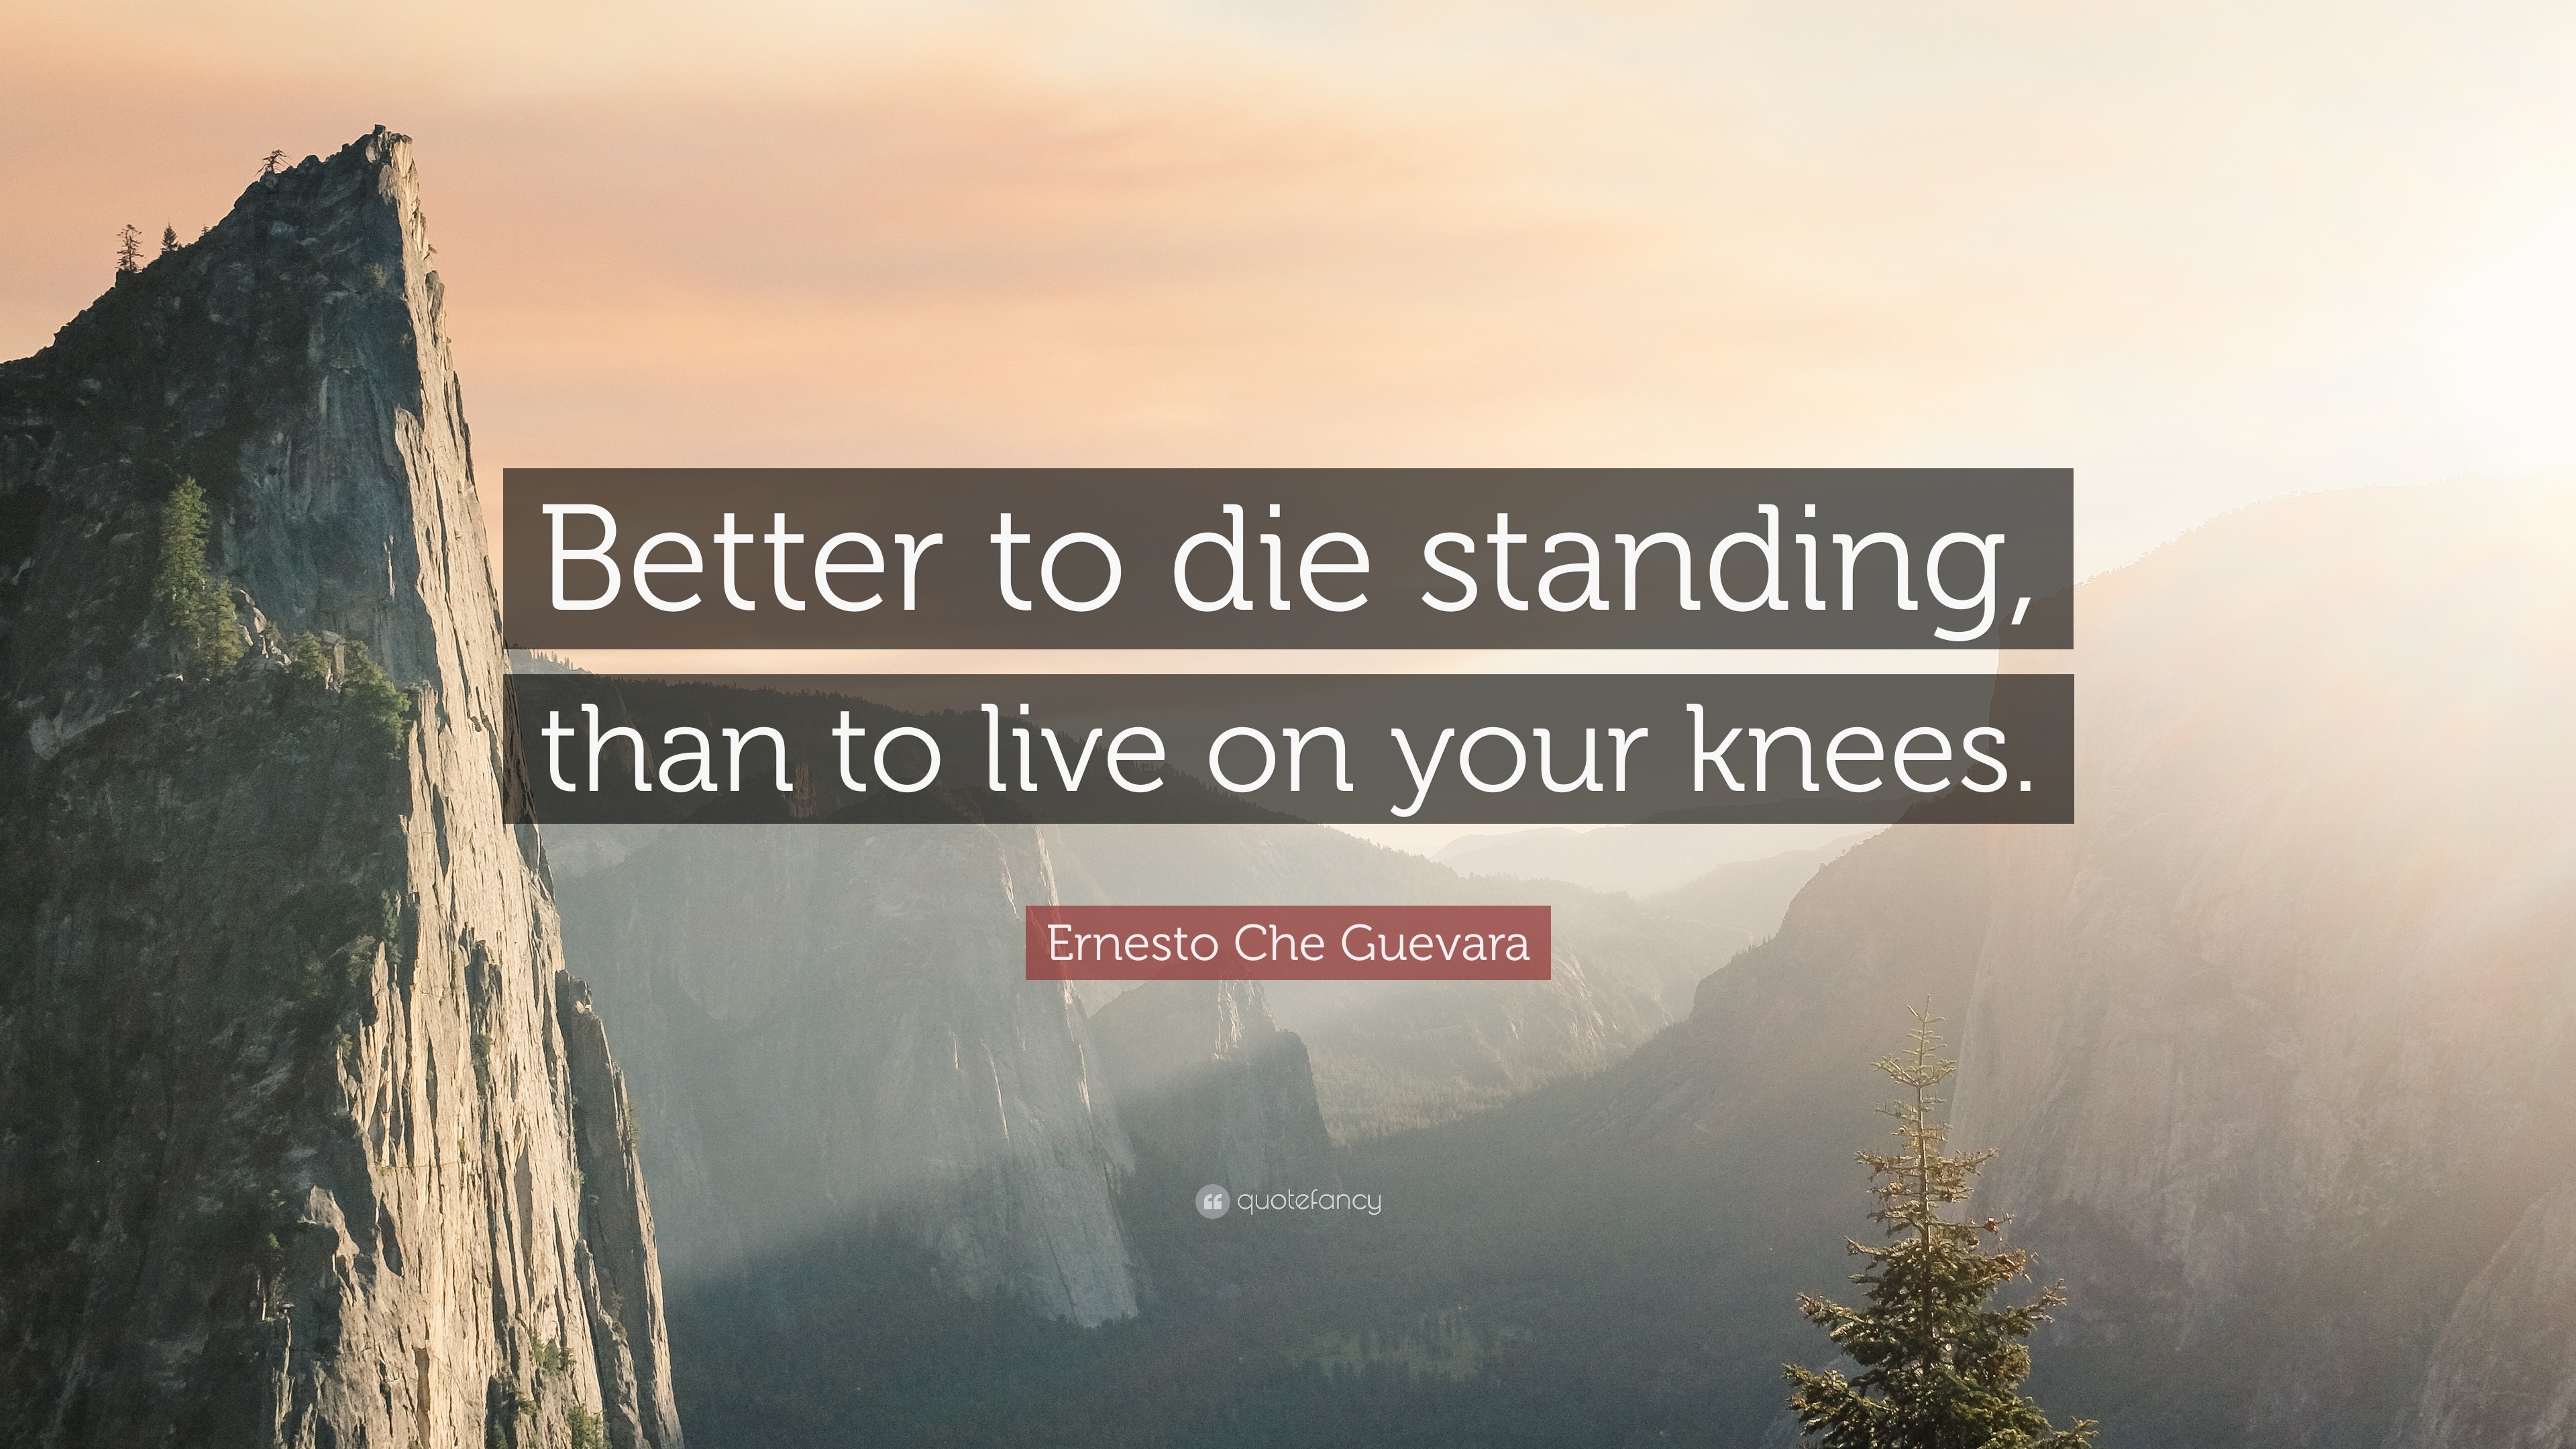 Verwonderend Ernesto Che Guevara Quote: “Better to die standing, than to live YM-53